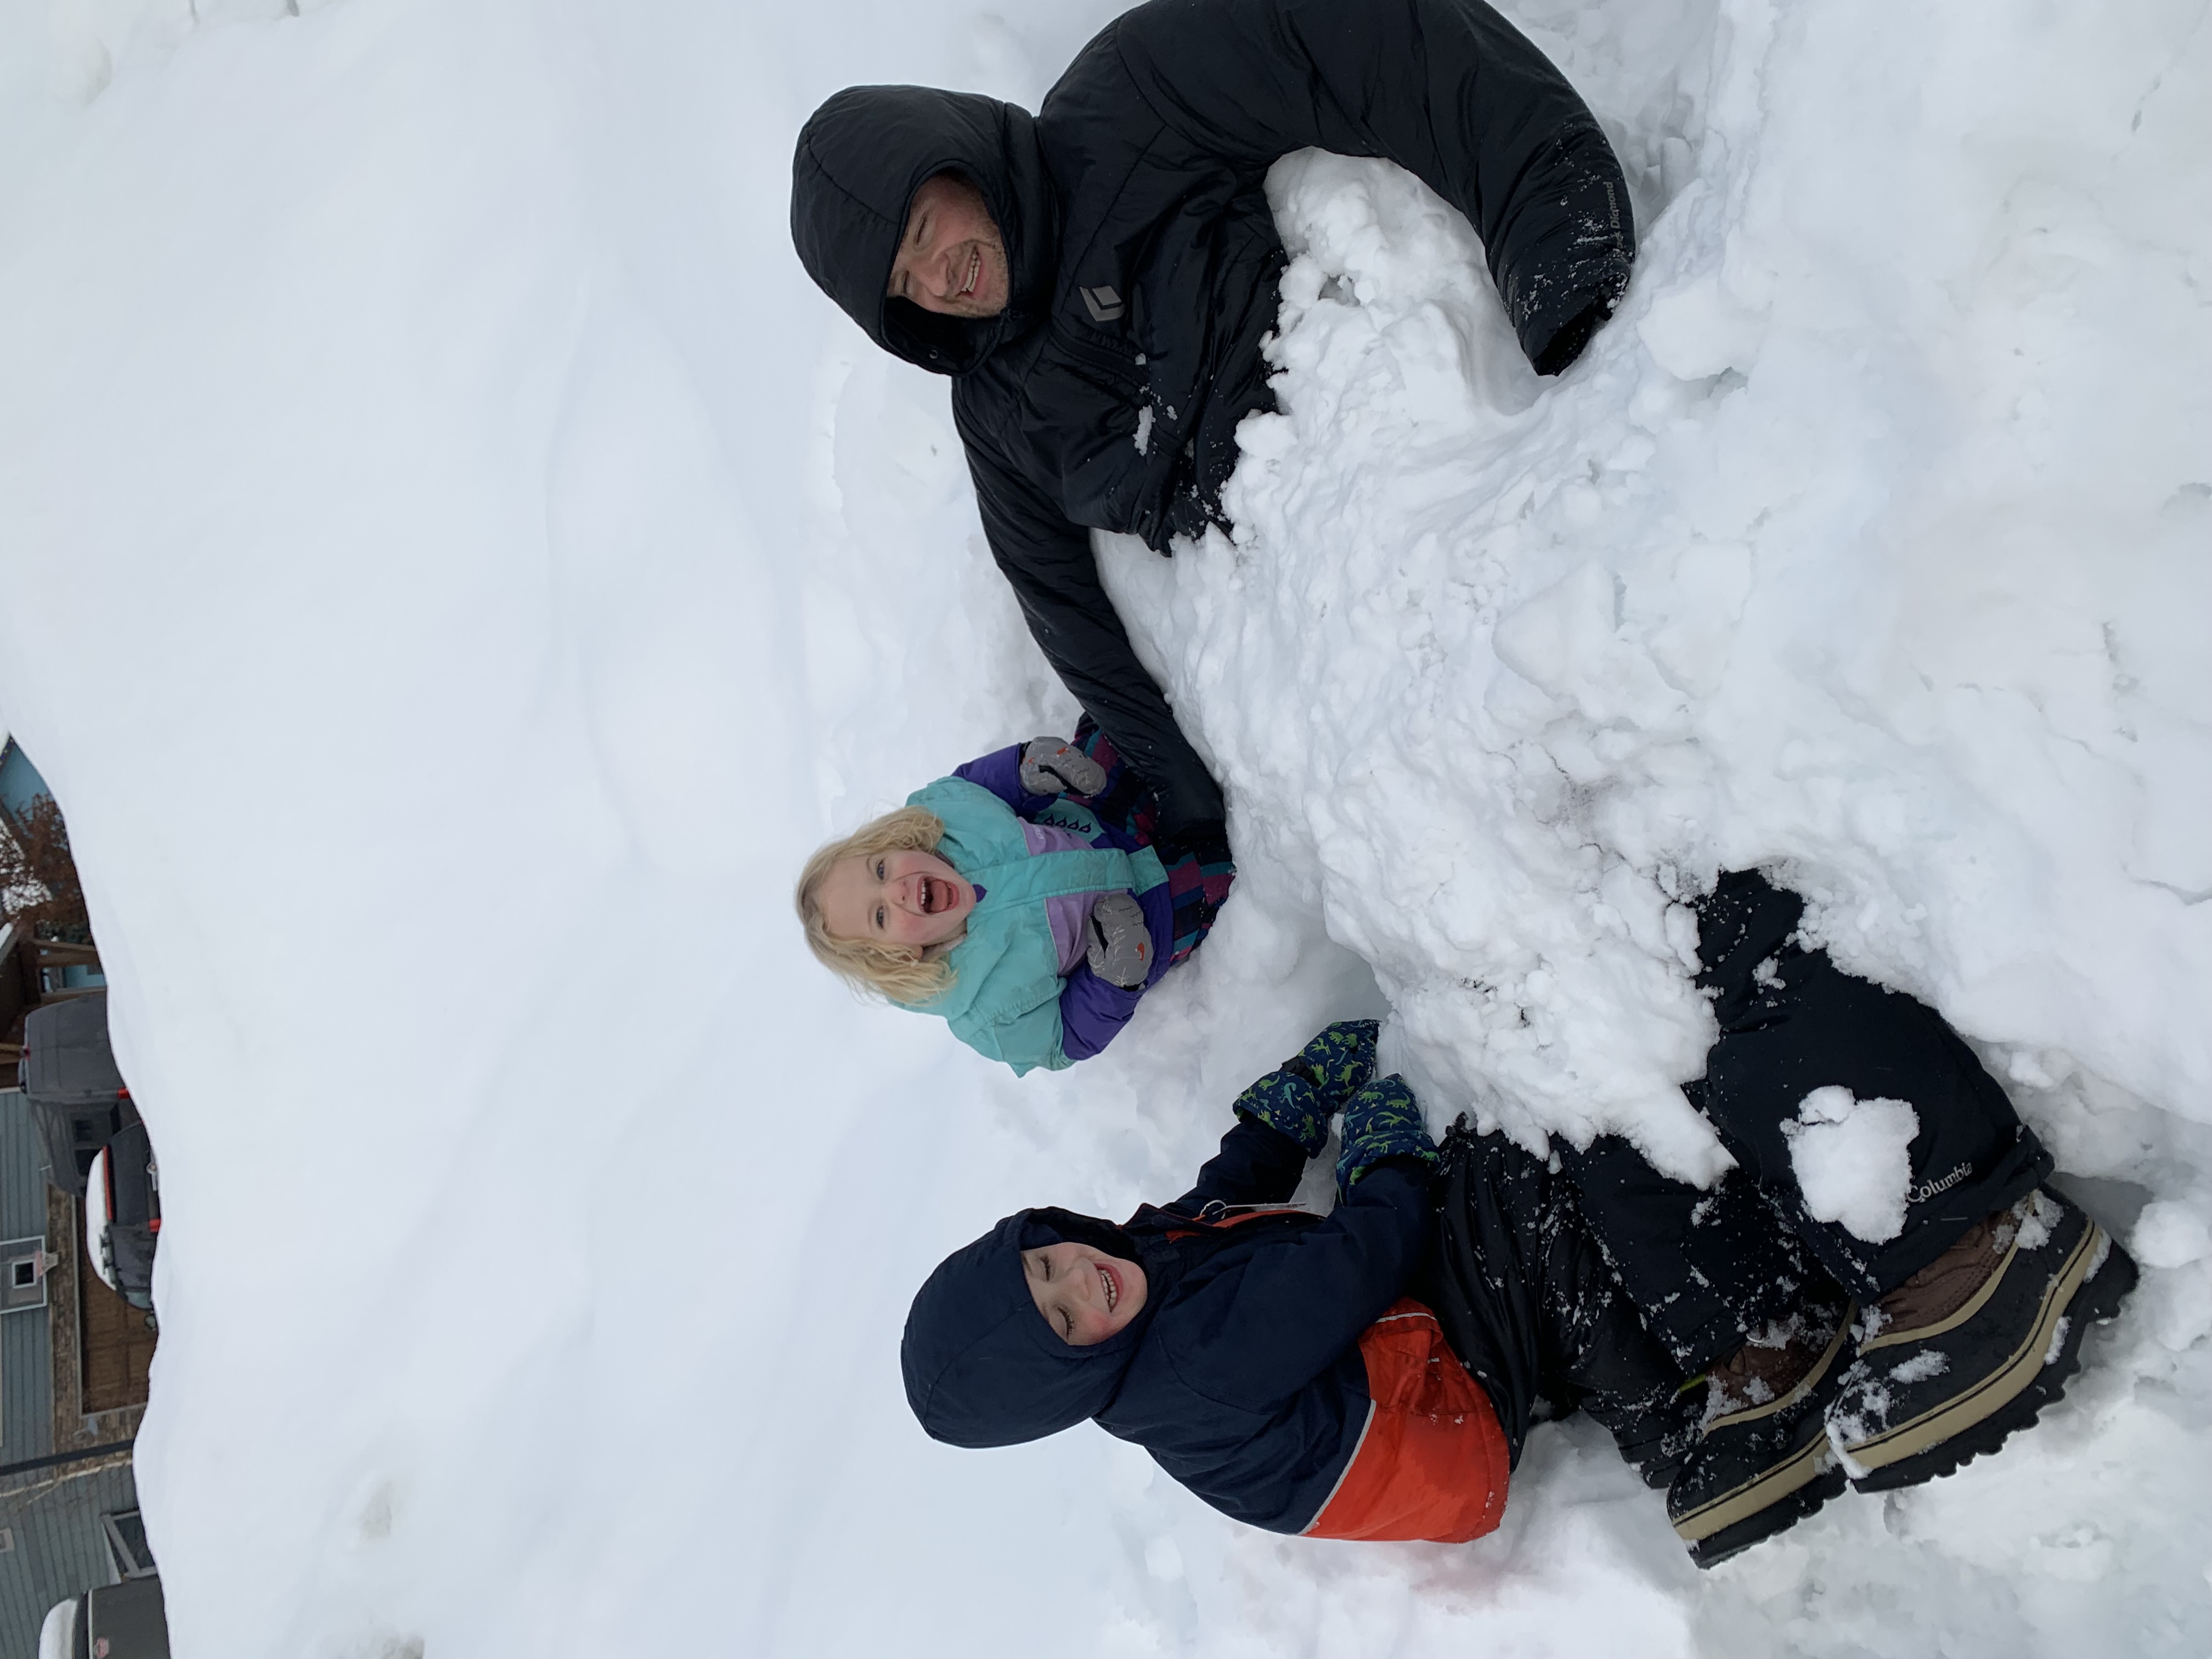 Two children burying an adult in the snow. All are smiling.